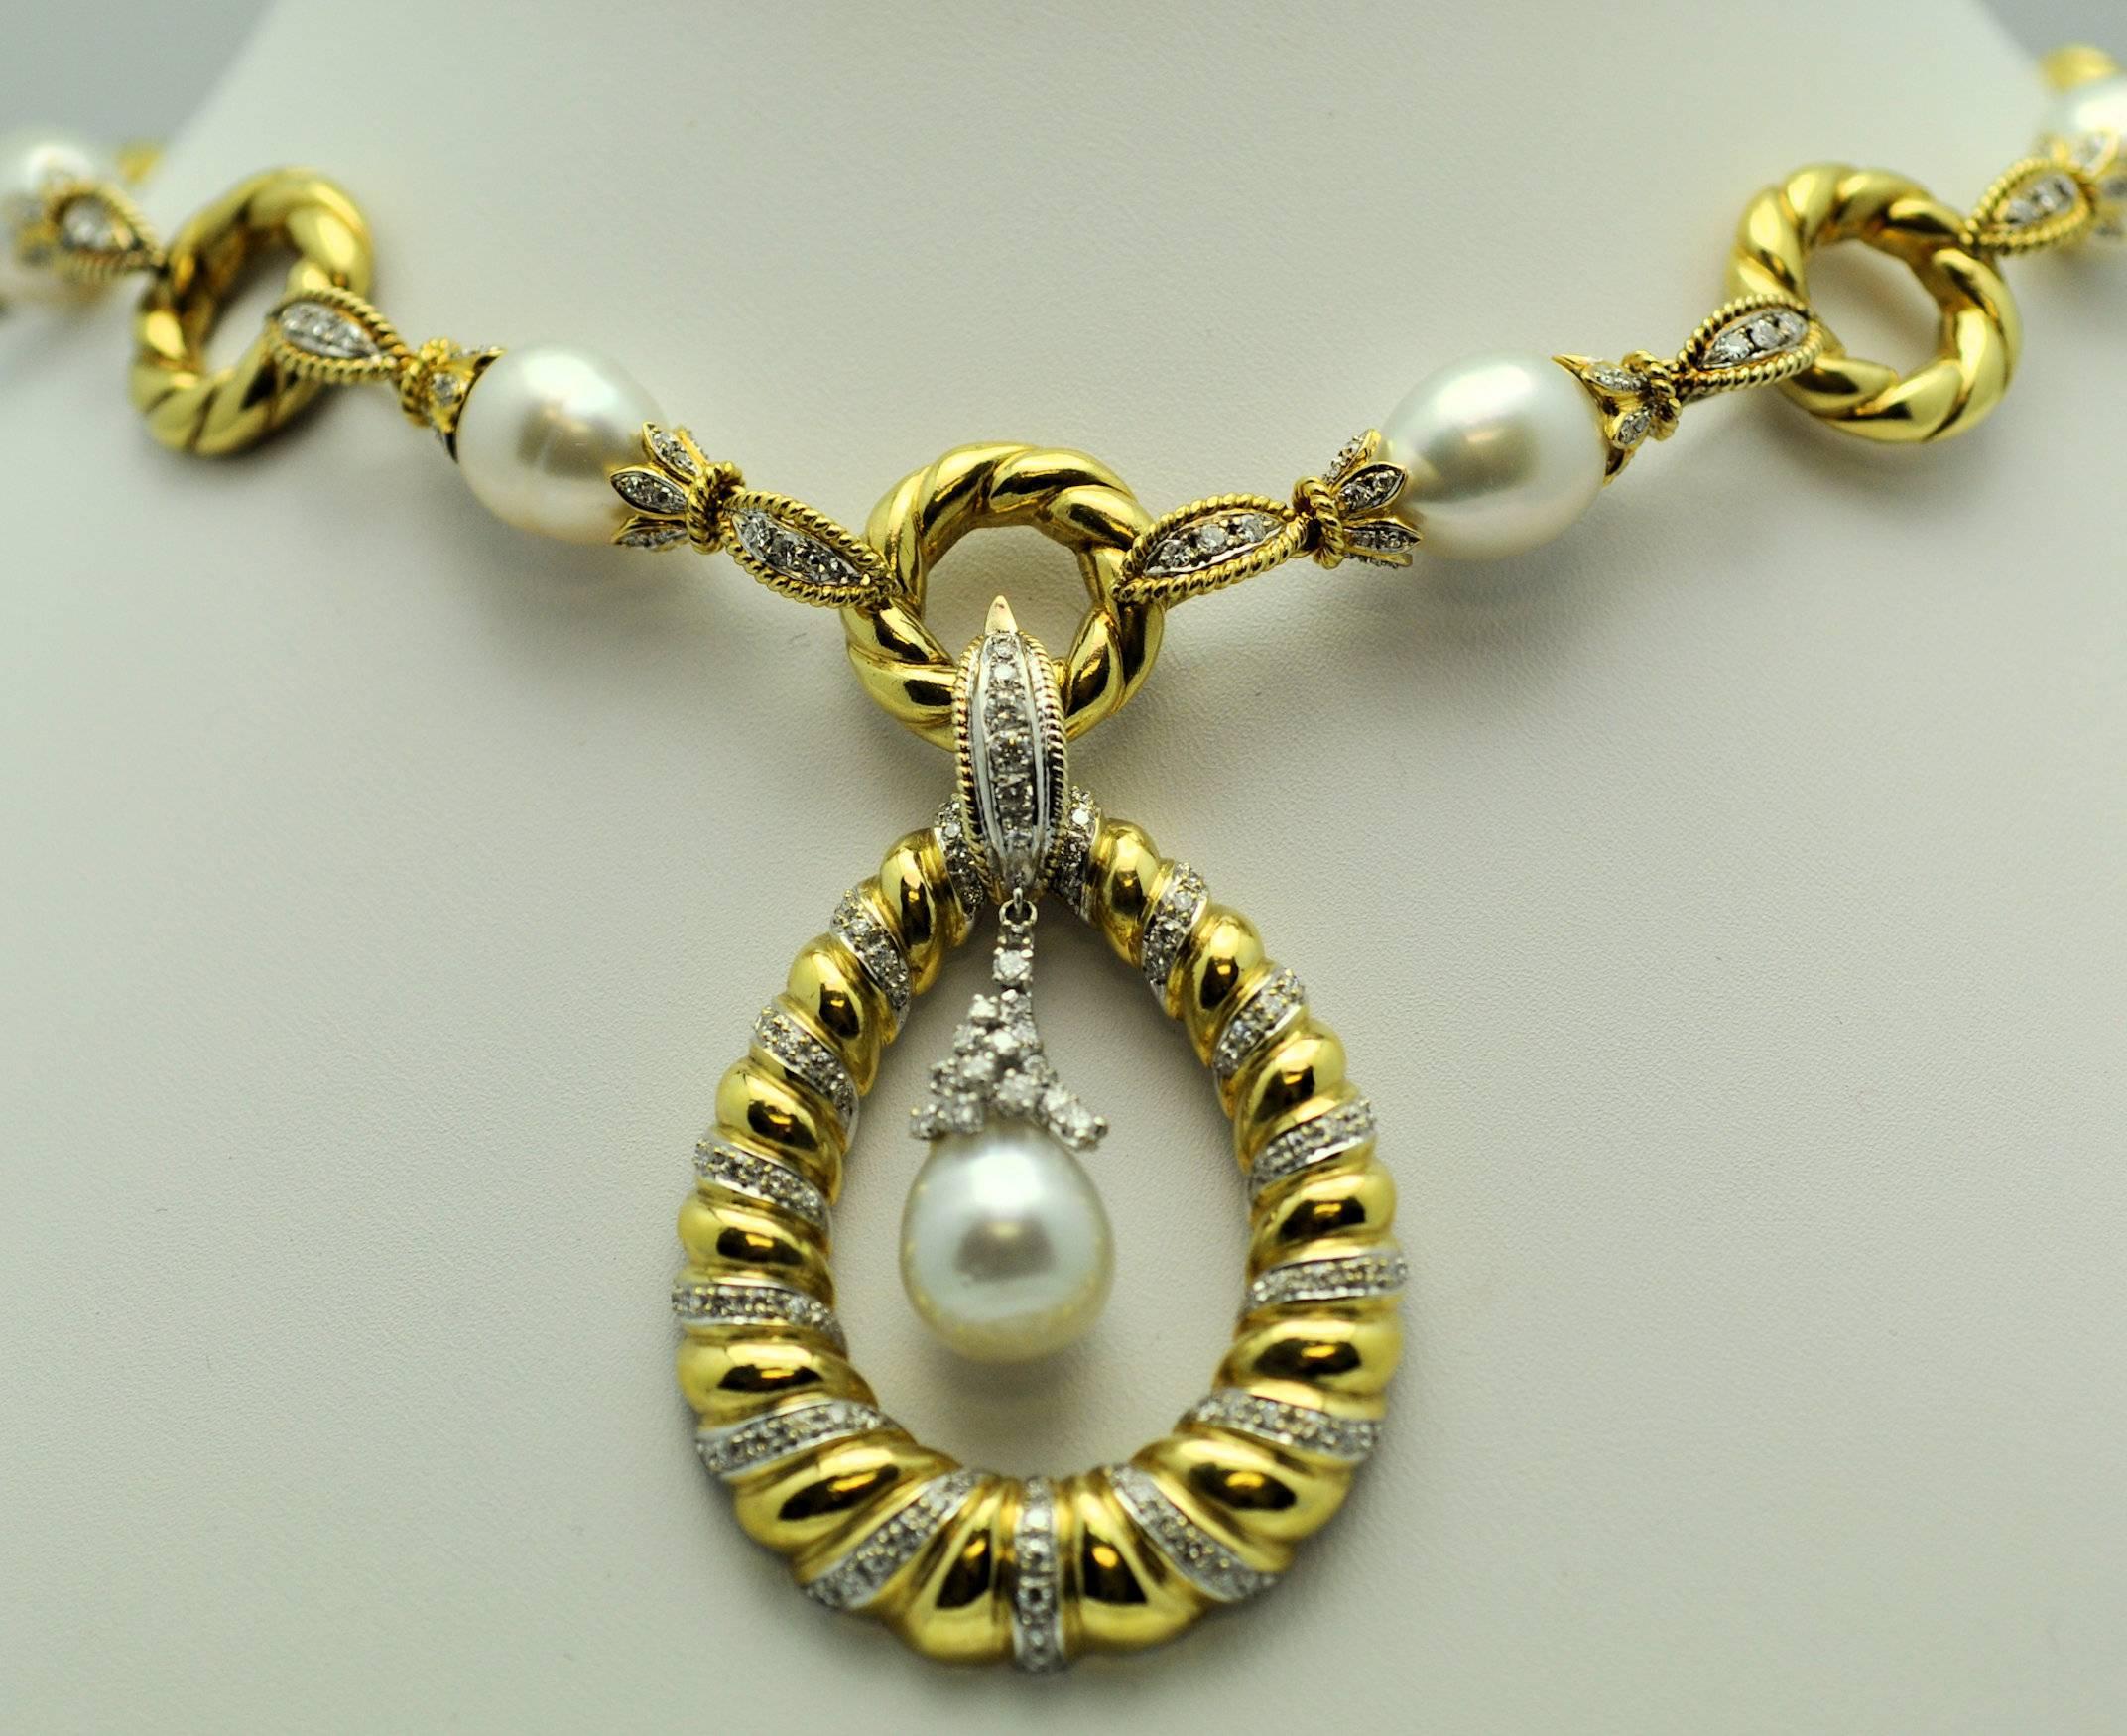 Opera length necklace of twist links adorned with South Sea Cultured Pearls and diamonds. Fourteen South Sea pearls measuring 10-12 mm., baroque, with beautiful and bright luster.  Links are tipped with bell caps contains diamonds.  Necklace